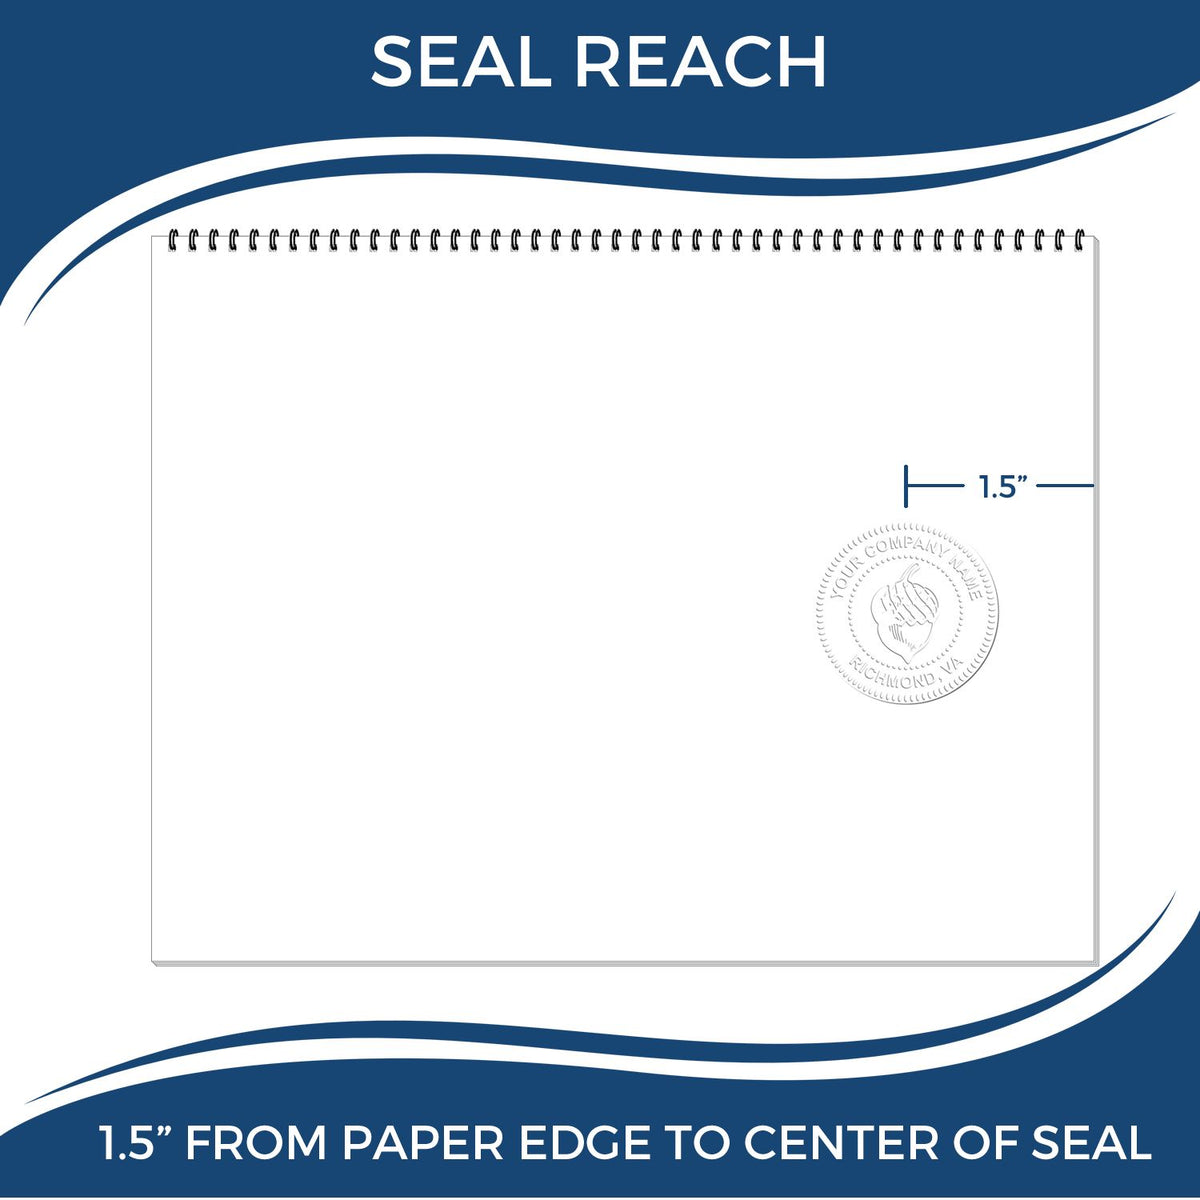 An infographic showing the seal reach which is represented by a ruler and a miniature seal image of the Handheld New Jersey Professional Engineer Embosser